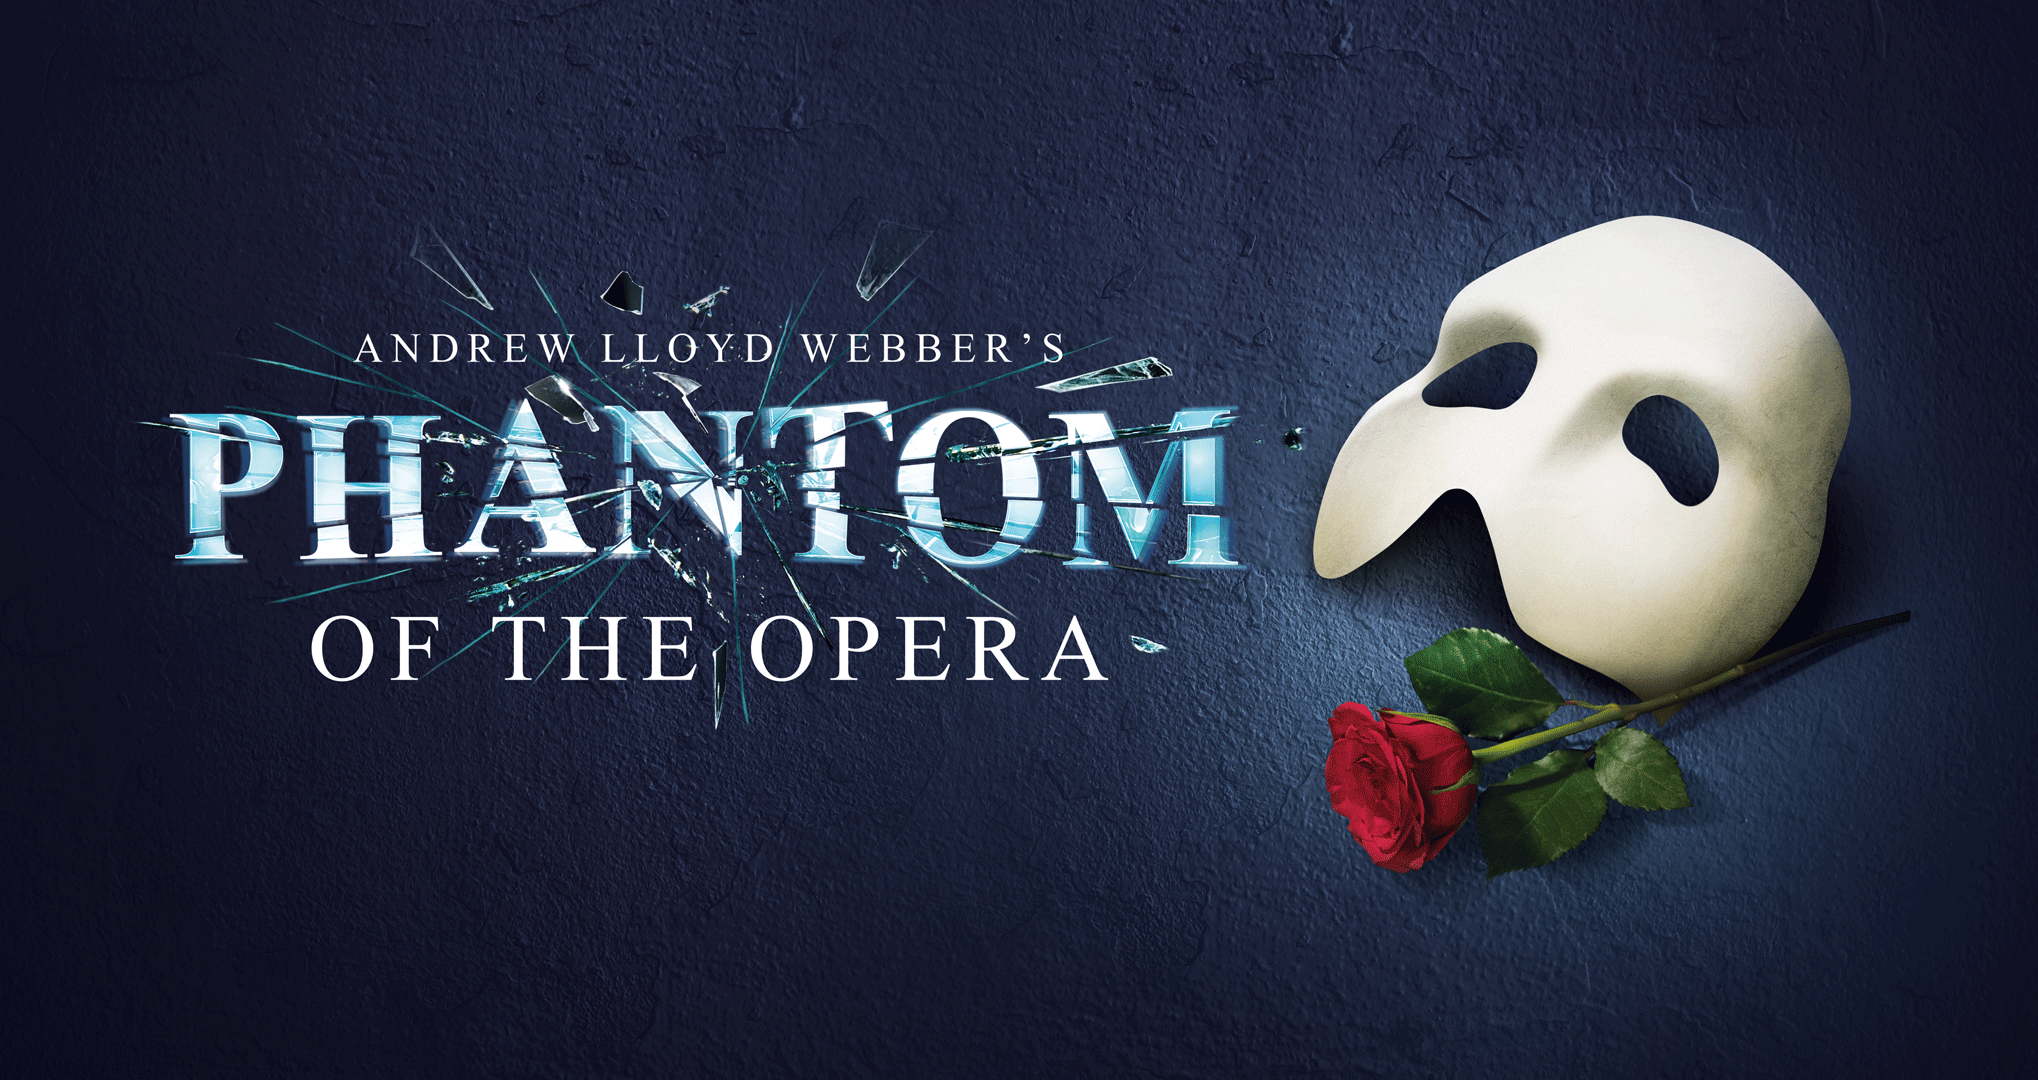 32-facts-about-the-movie-the-phantom-of-the-opera